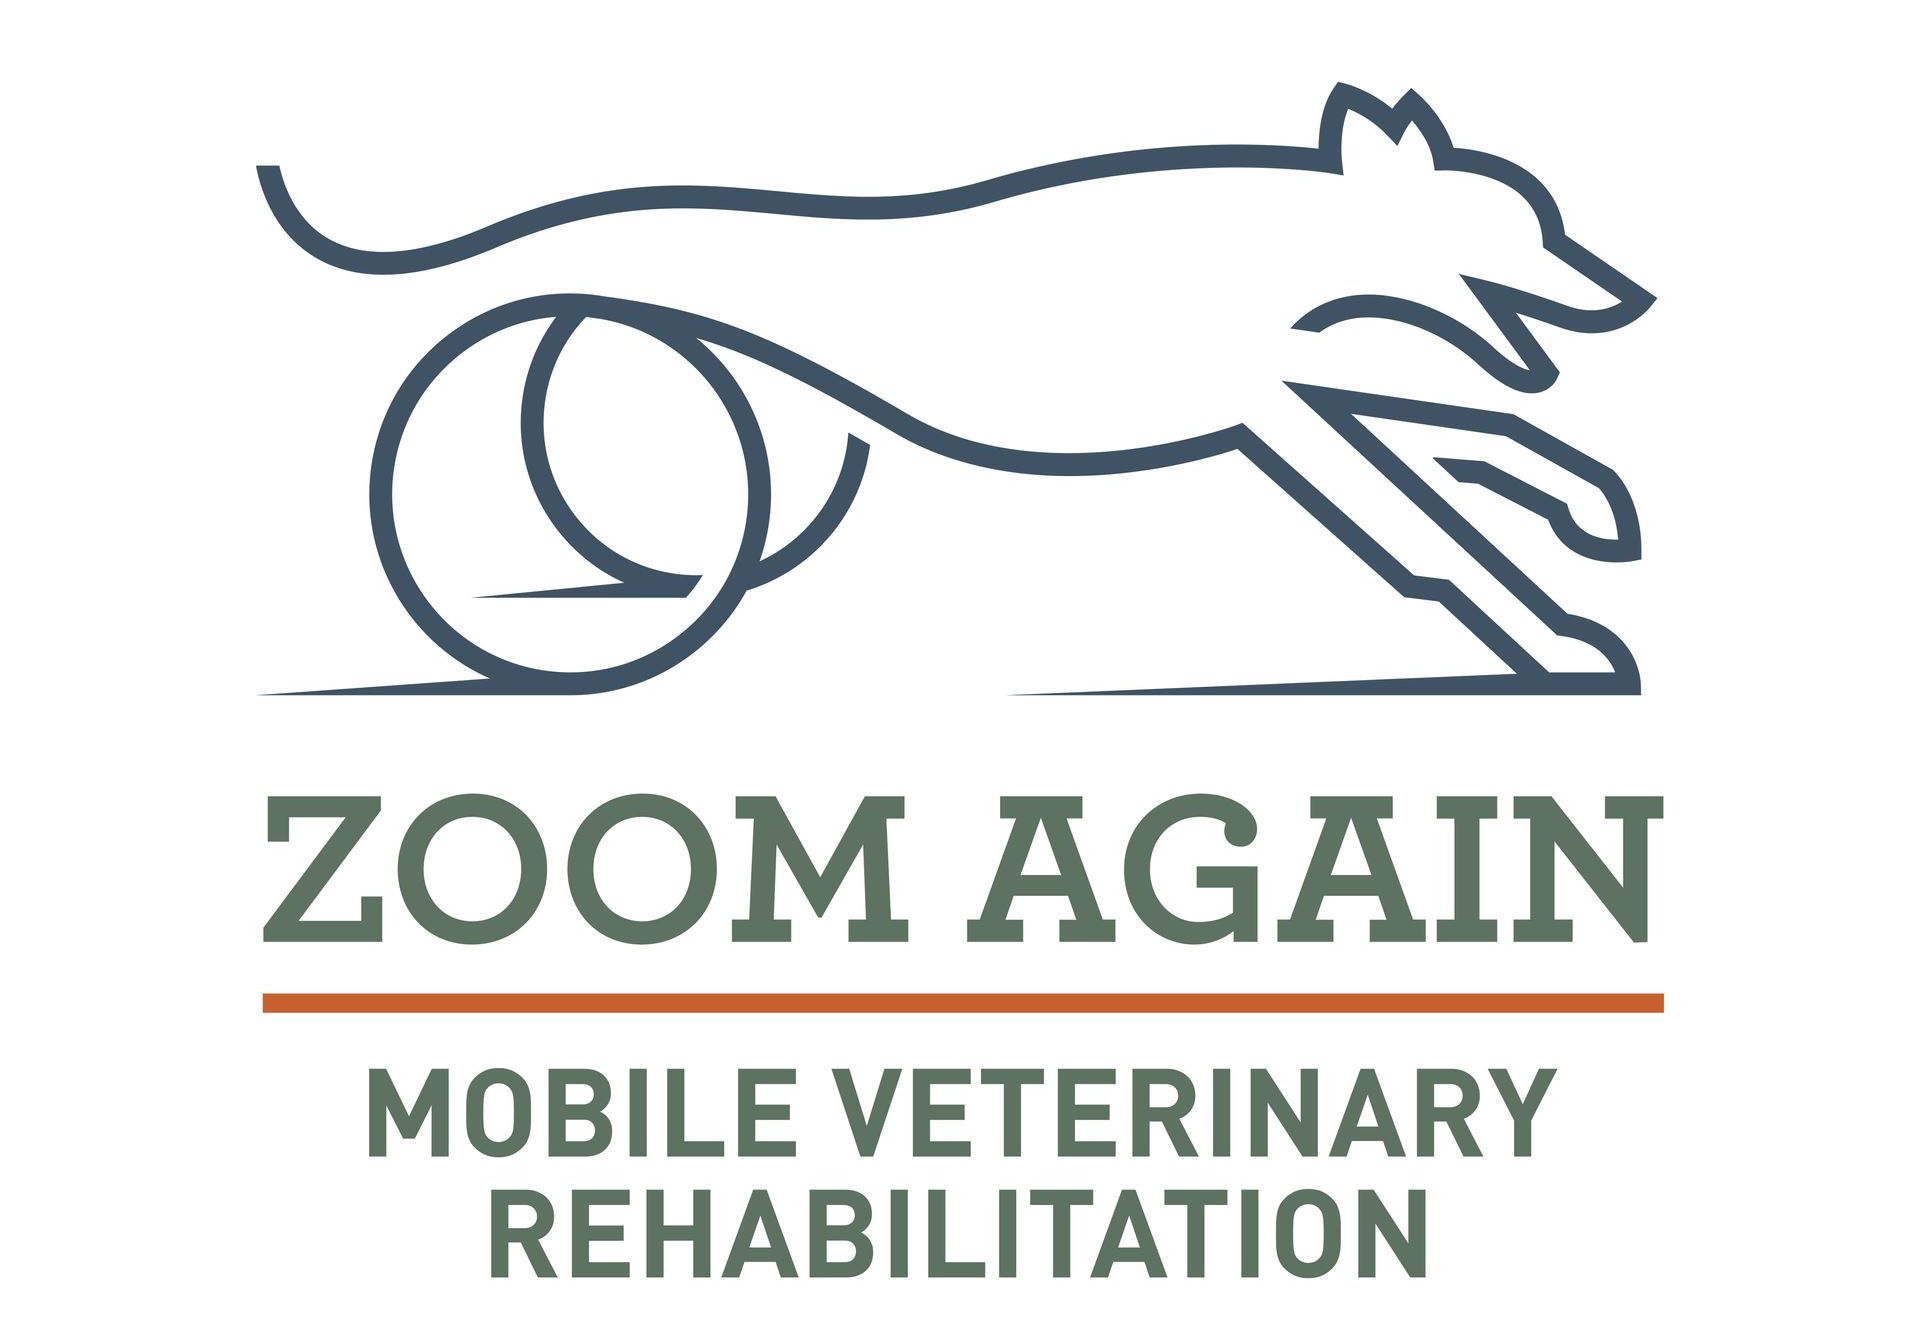 Logo image of Zoom Again Mobile Veterinary Rehabilitation featuring a line drawing of a sighthound with wheels for back legs